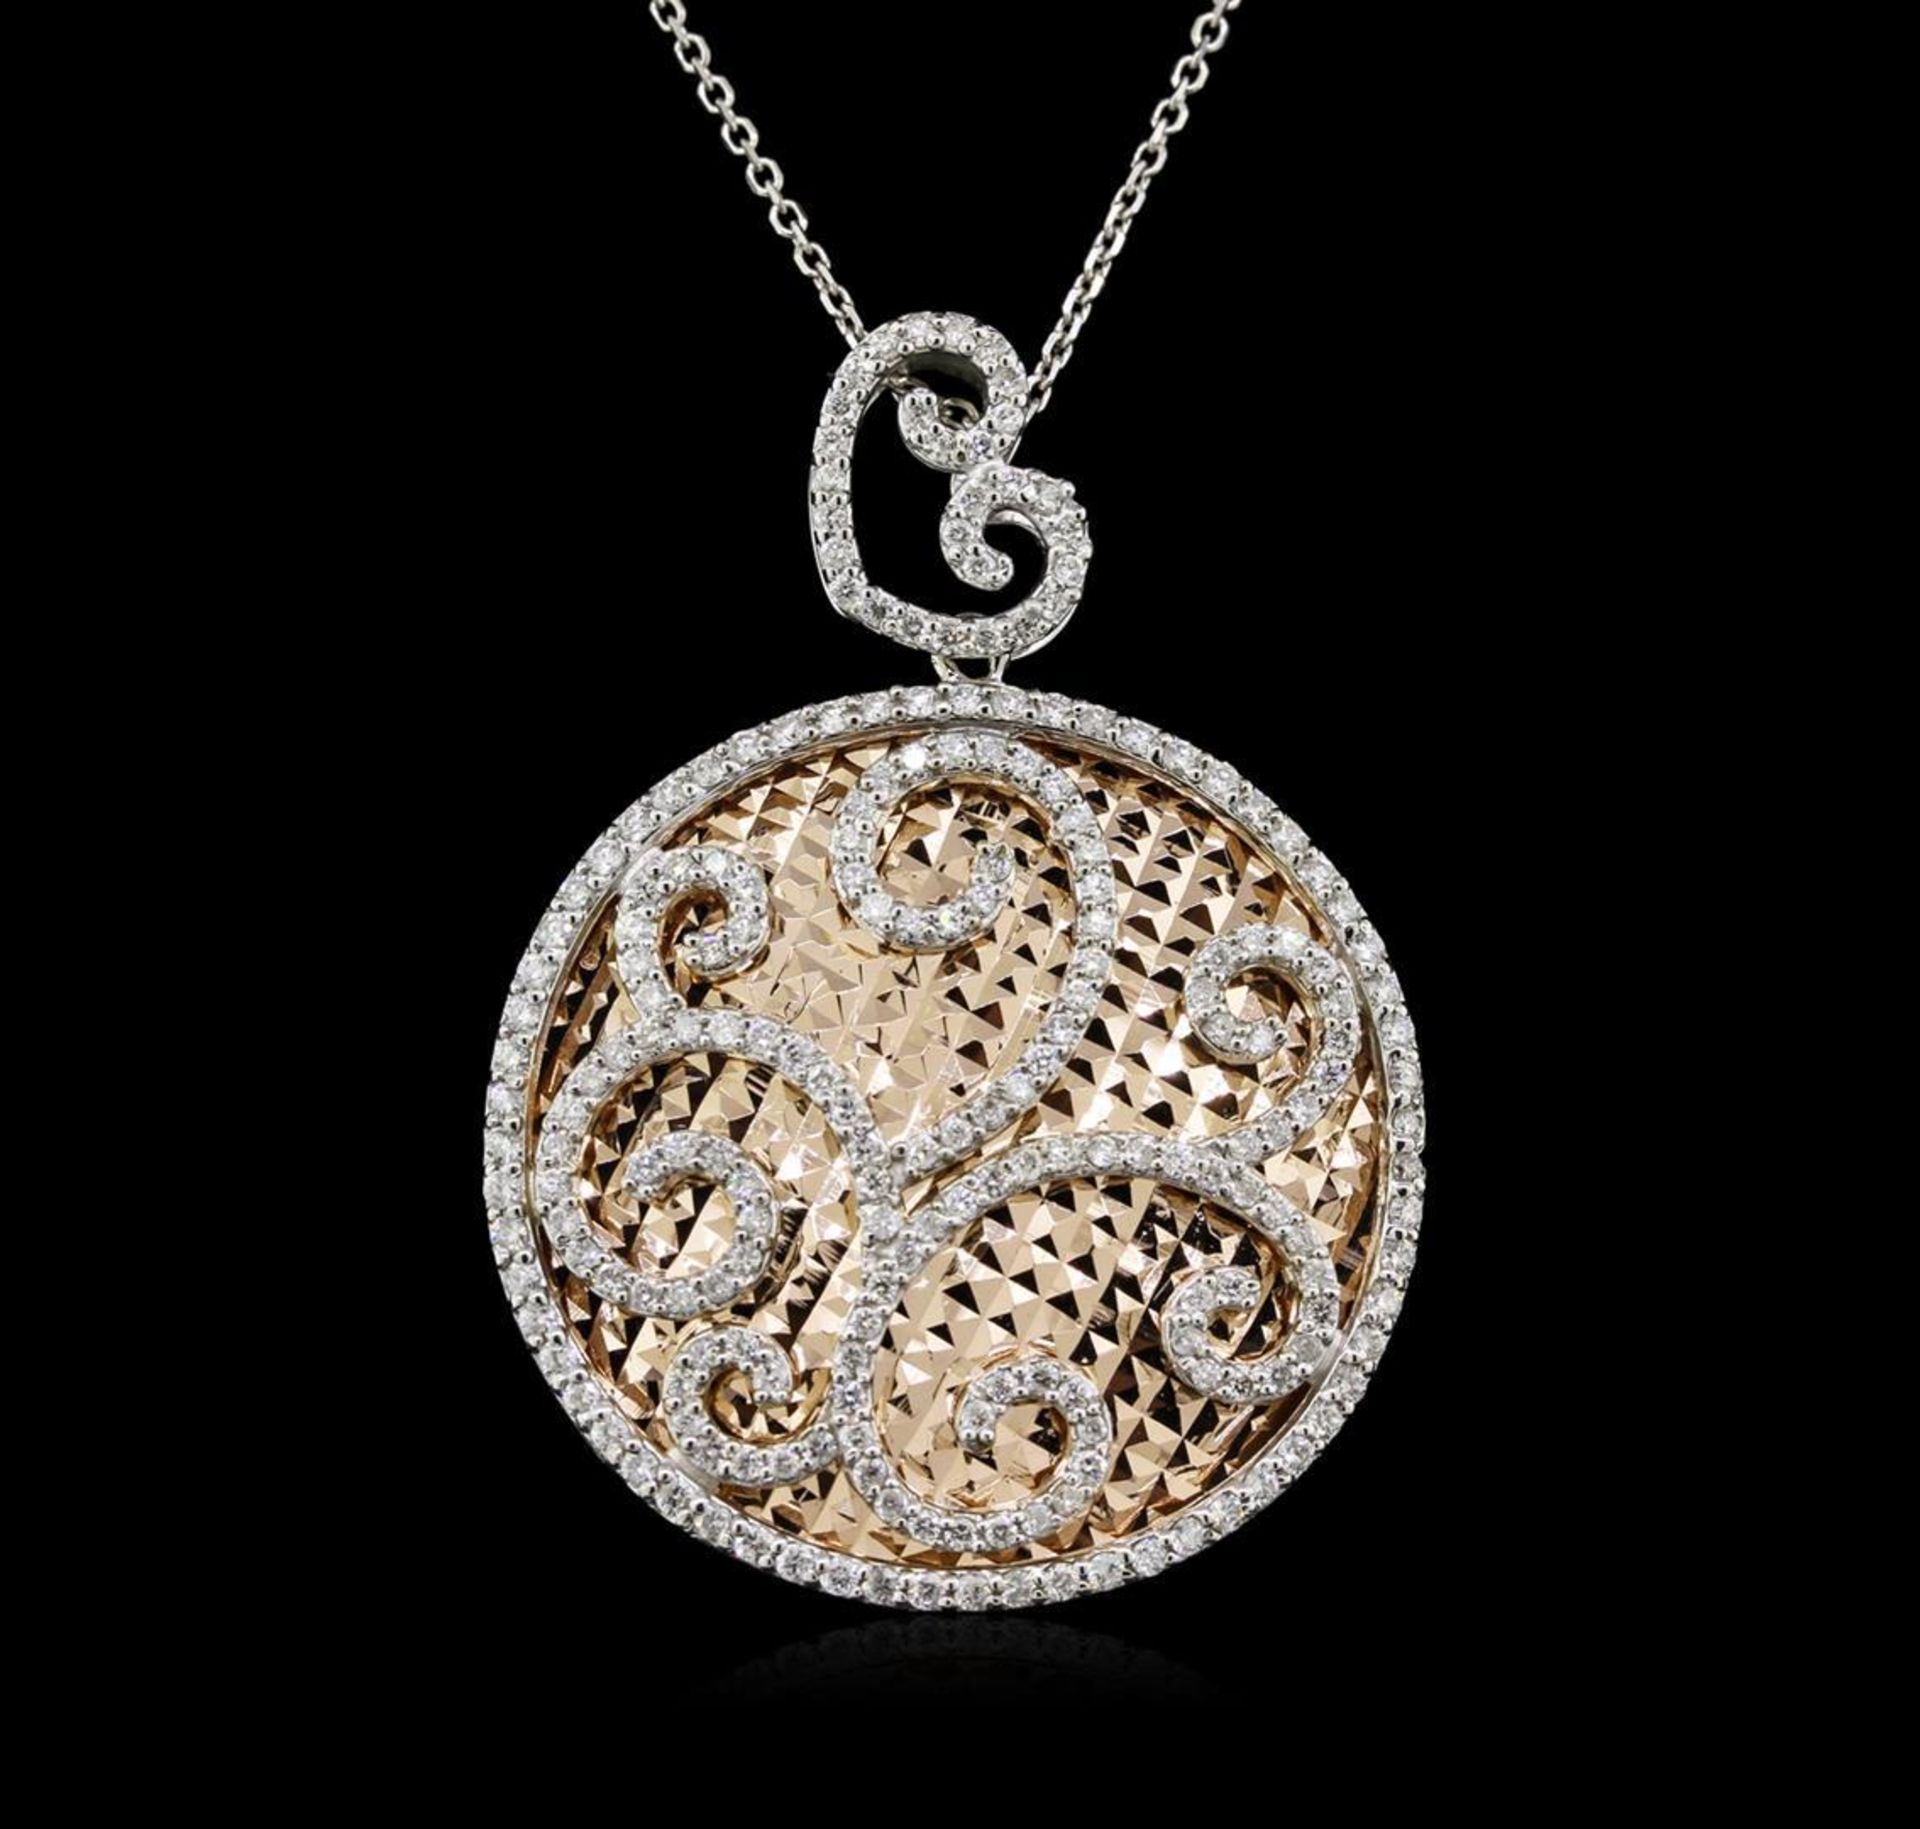 1.55 ctw Diamond Pendant With Chain - 14KT Two-Tone Gold - Image 2 of 3